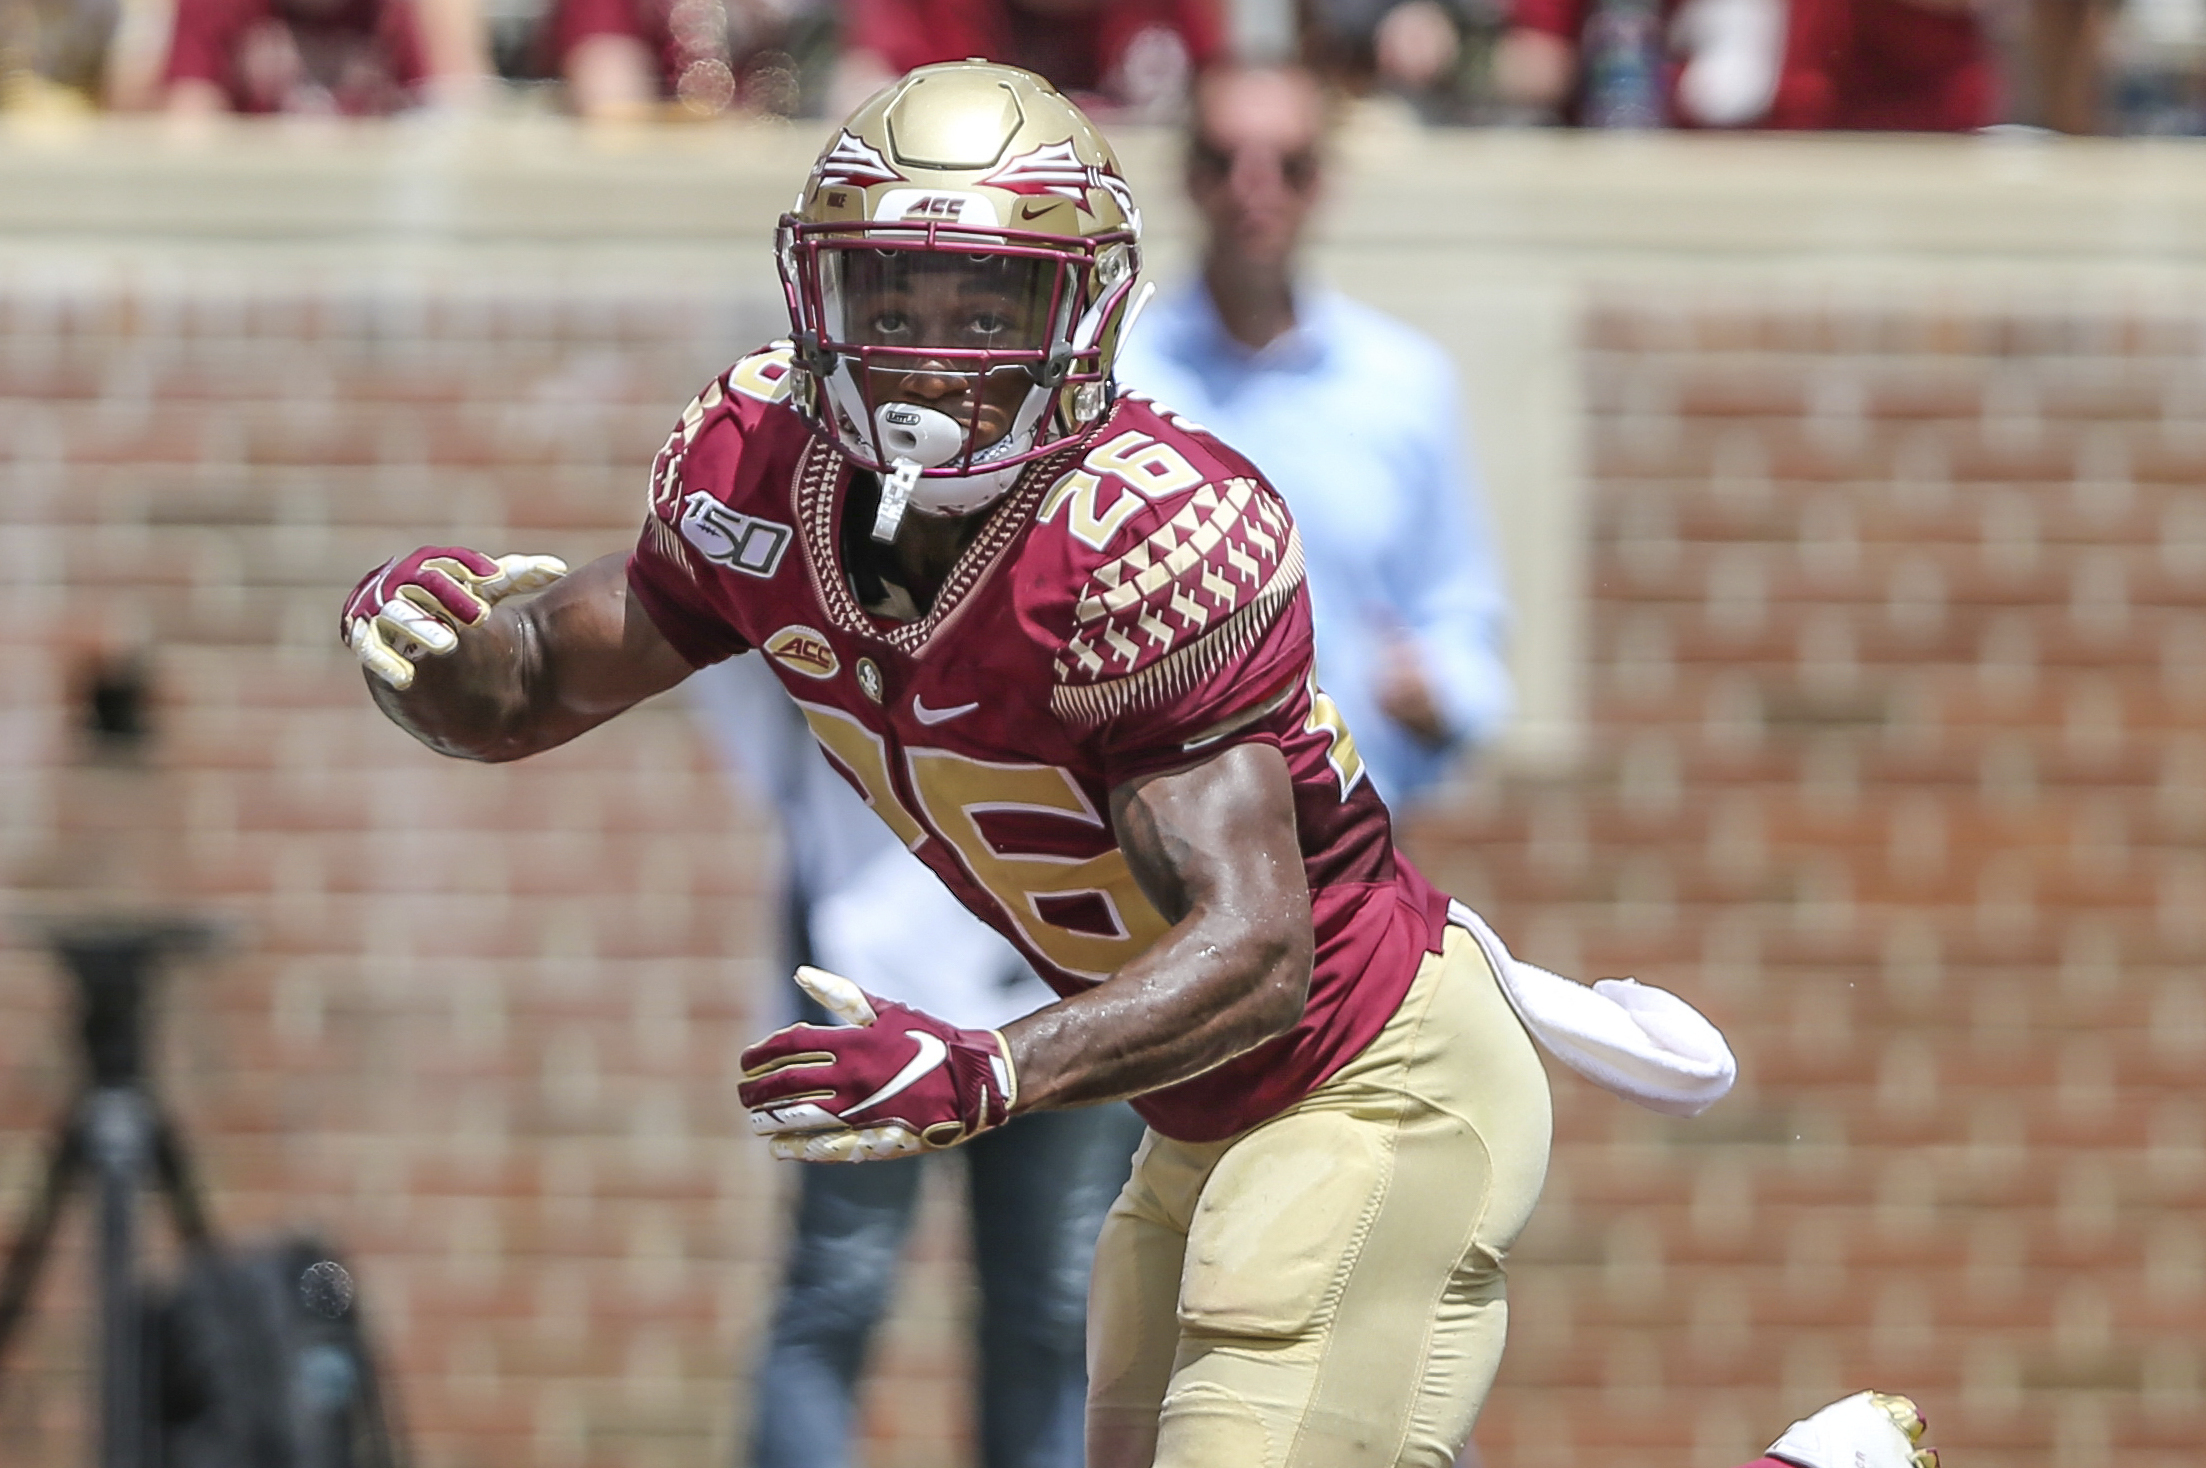 NFL Draft: Could Asante Samuel Jr. sneak into the first round?